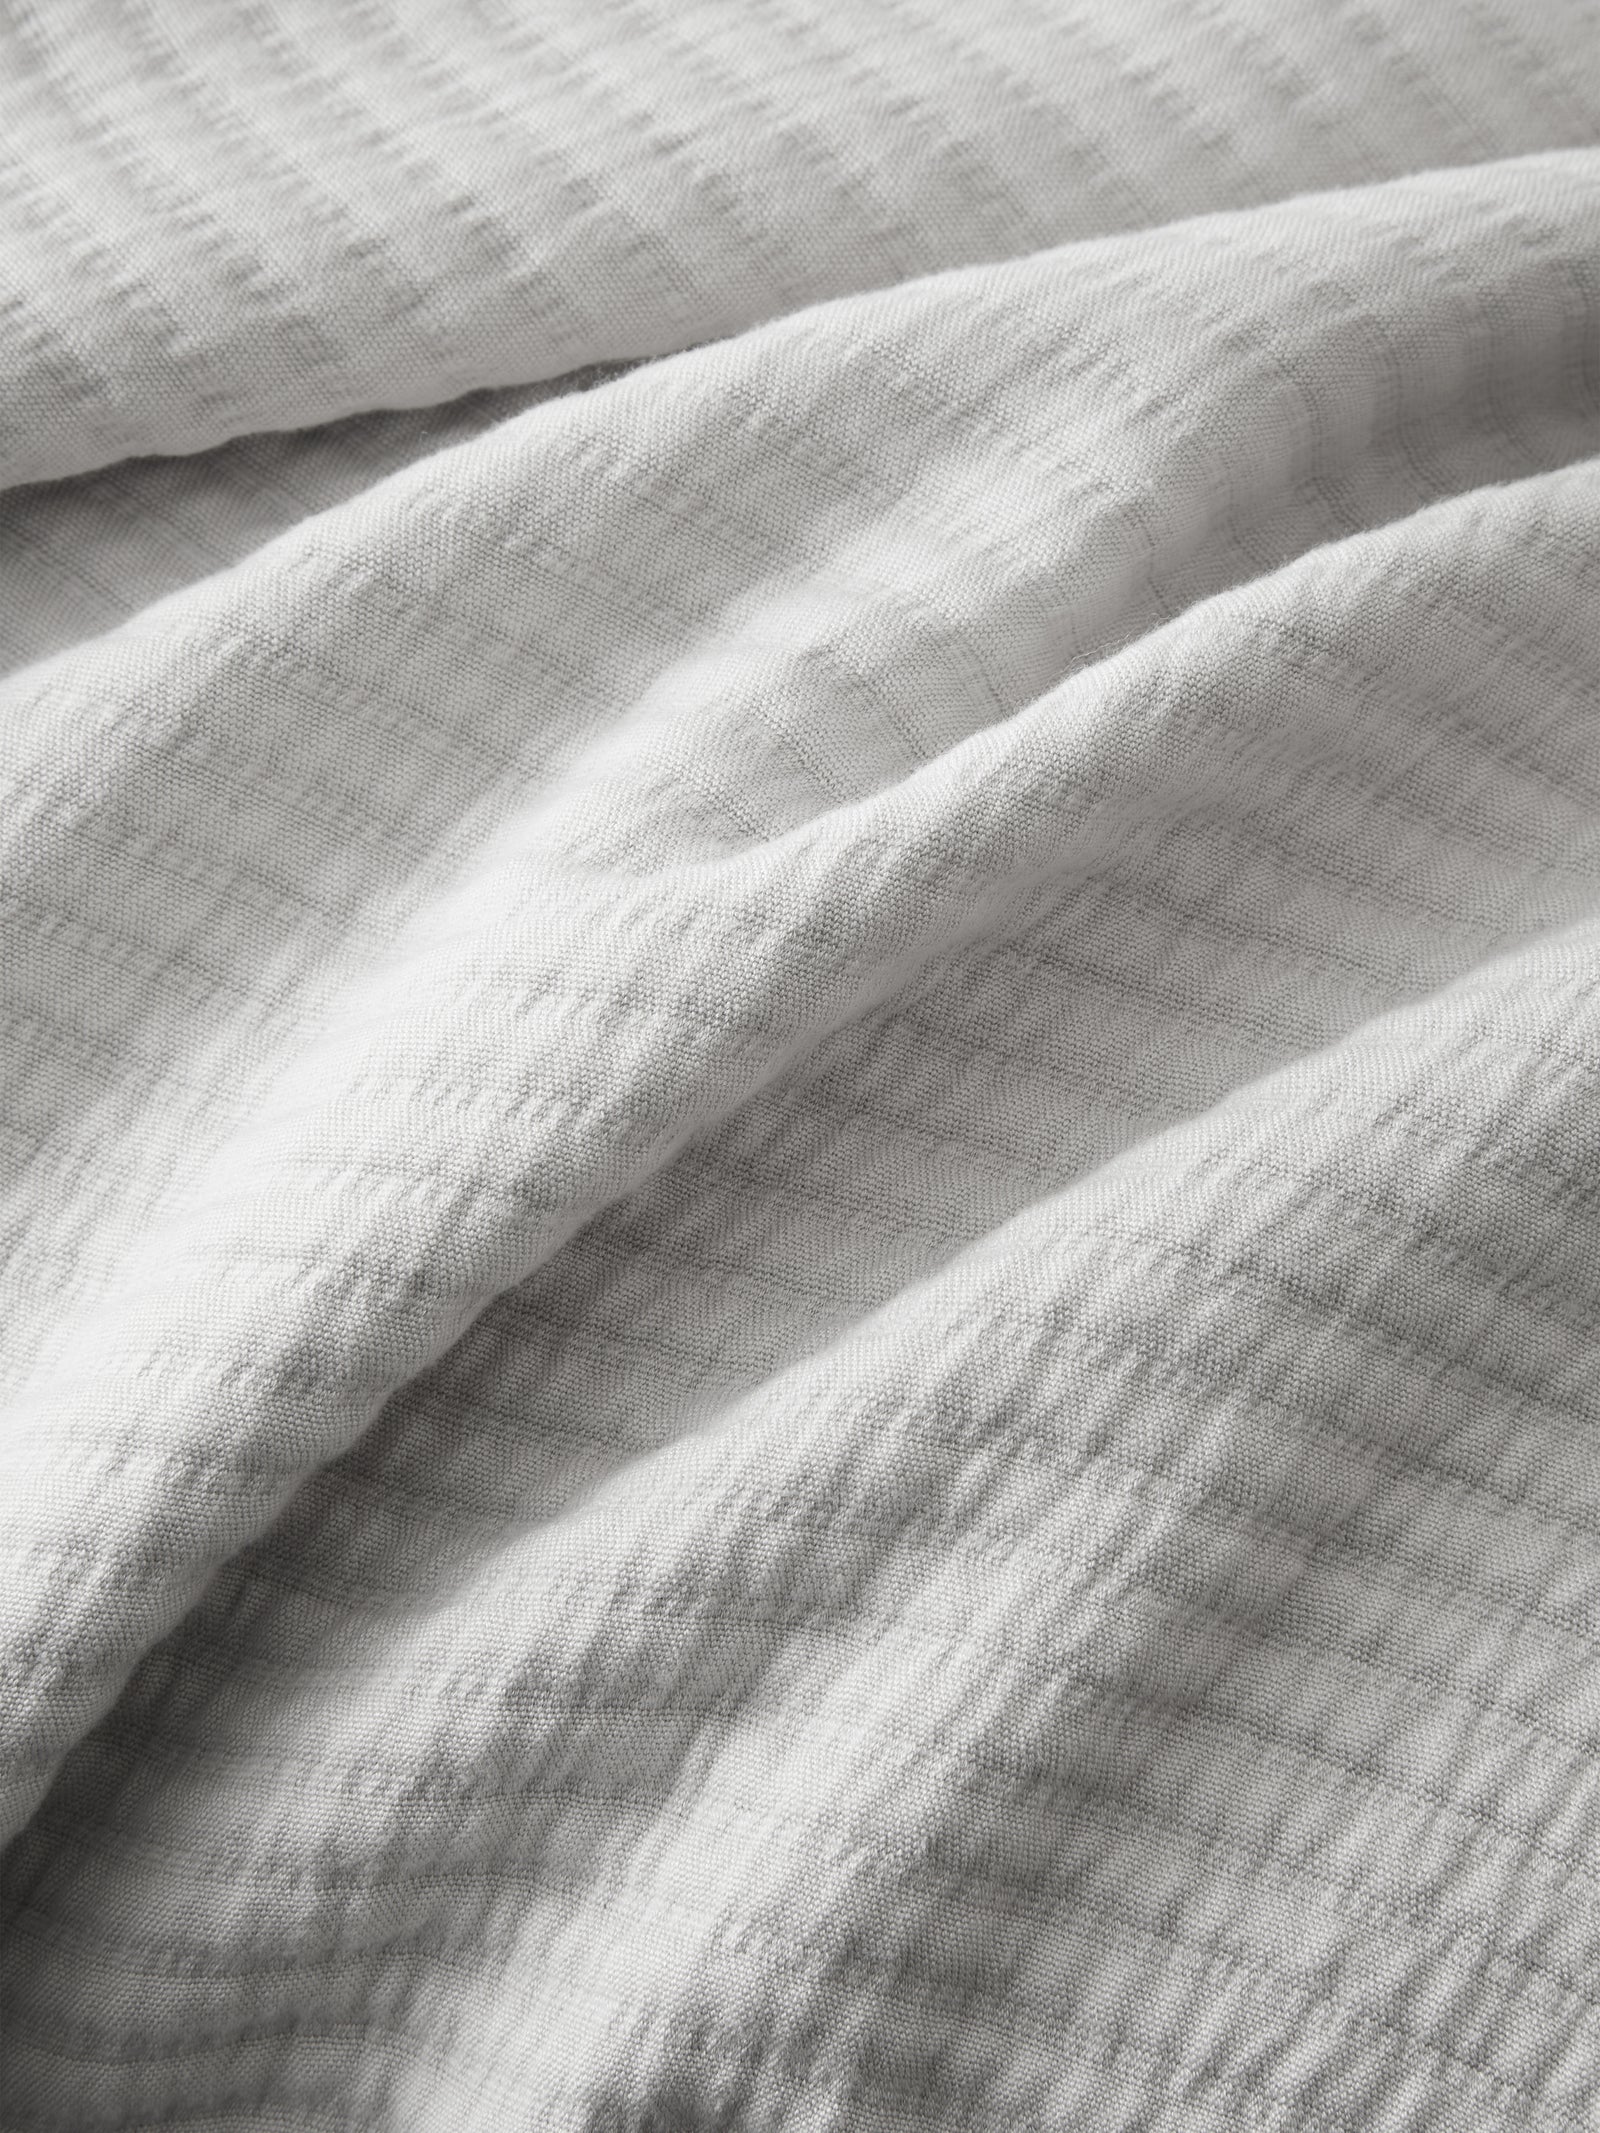 Close up of light grey coverlet fabric 